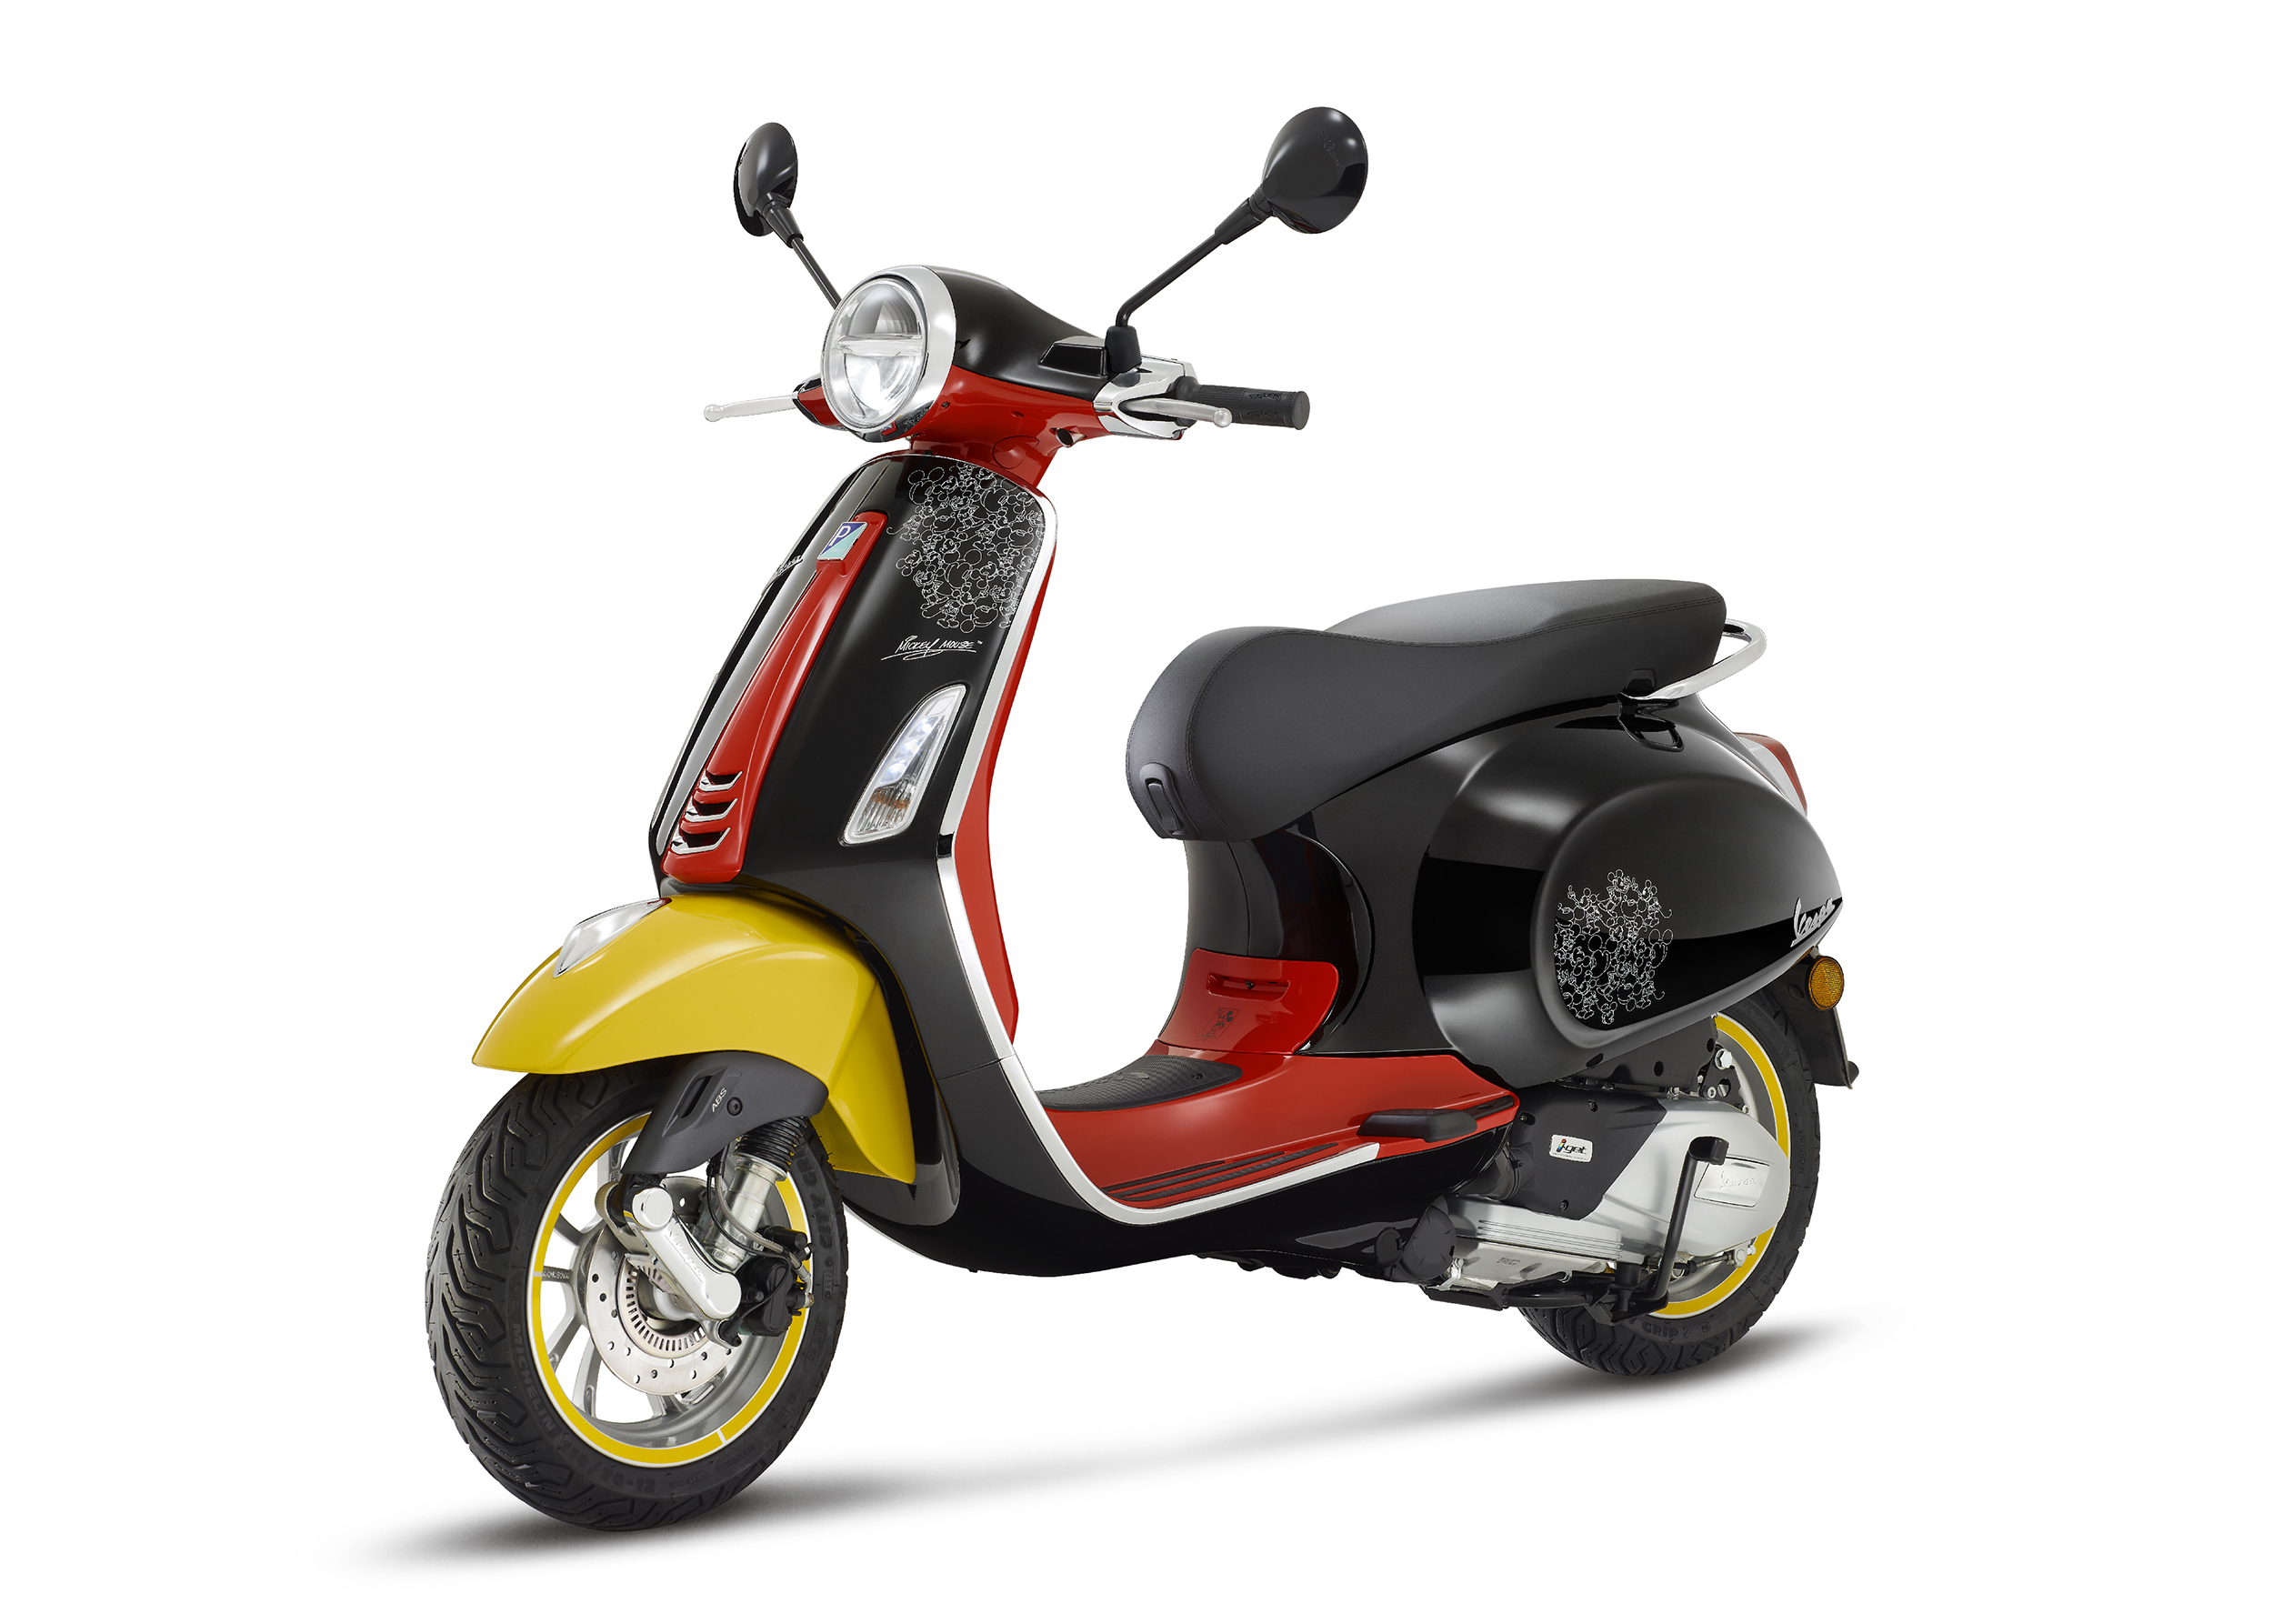 Vespa 946 Christian Dior Edition Scooter Unveiled - ZigWheels